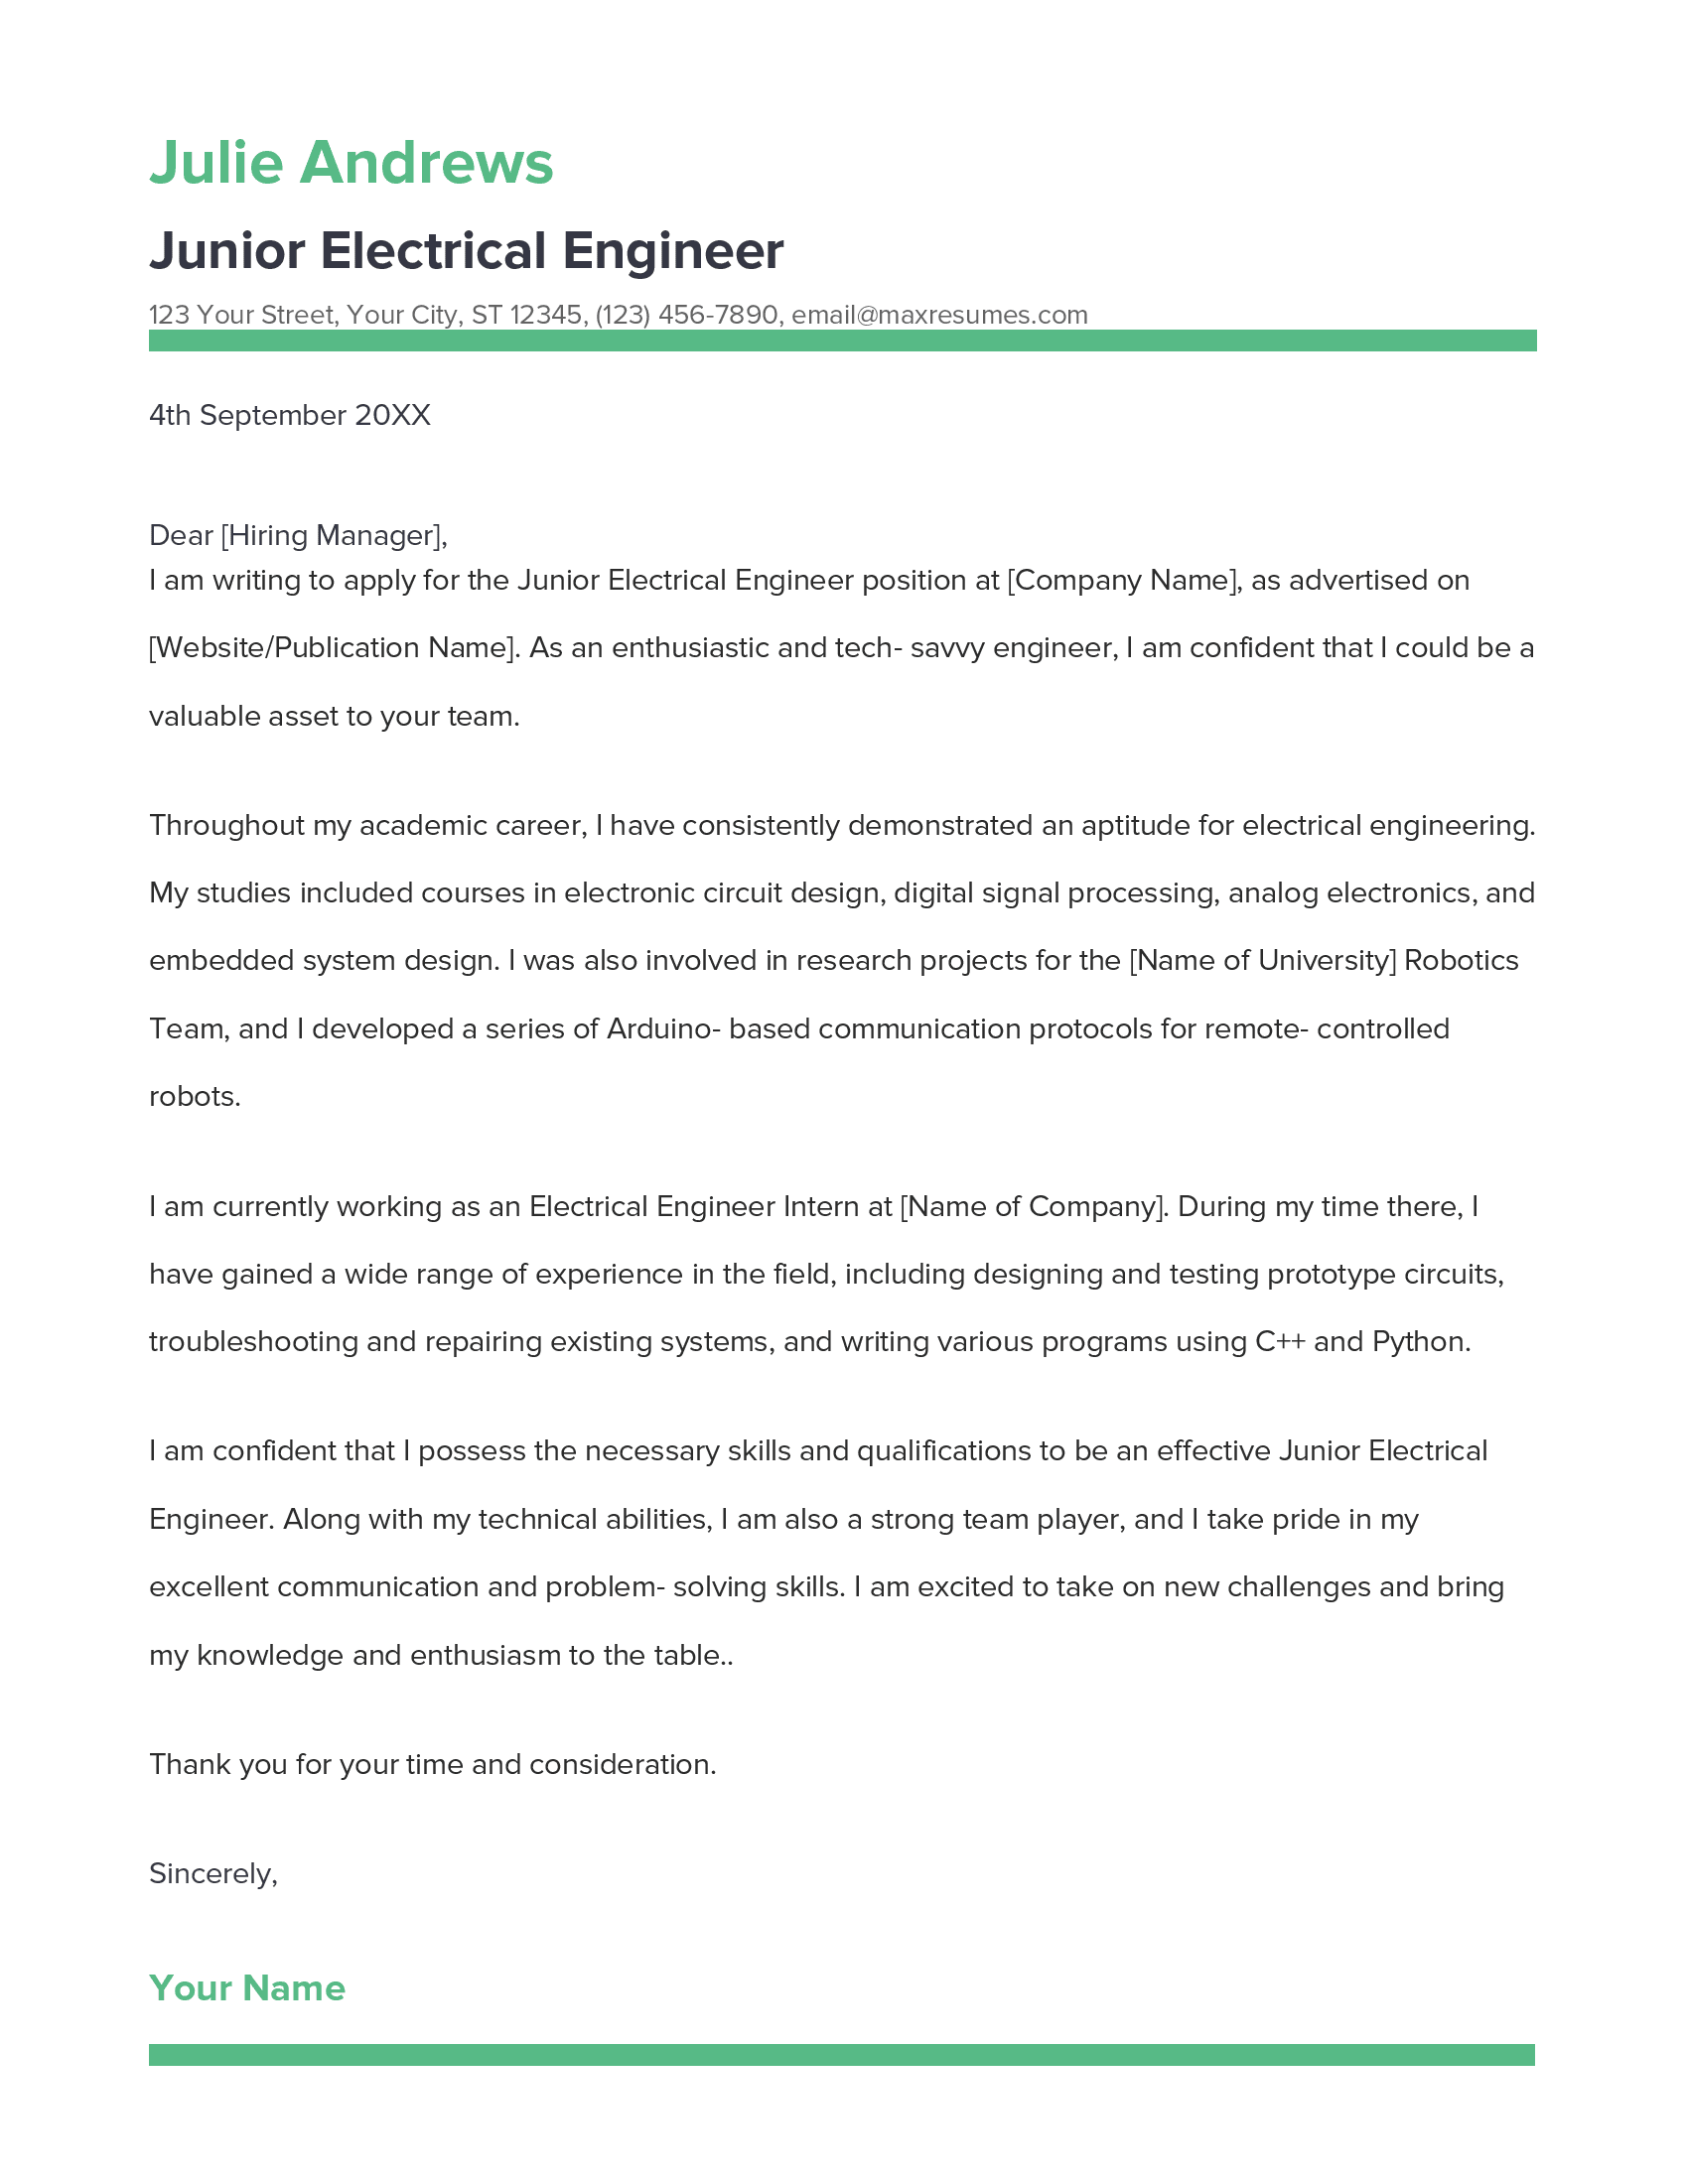 Junior Electrical Engineer Cover Letter Example